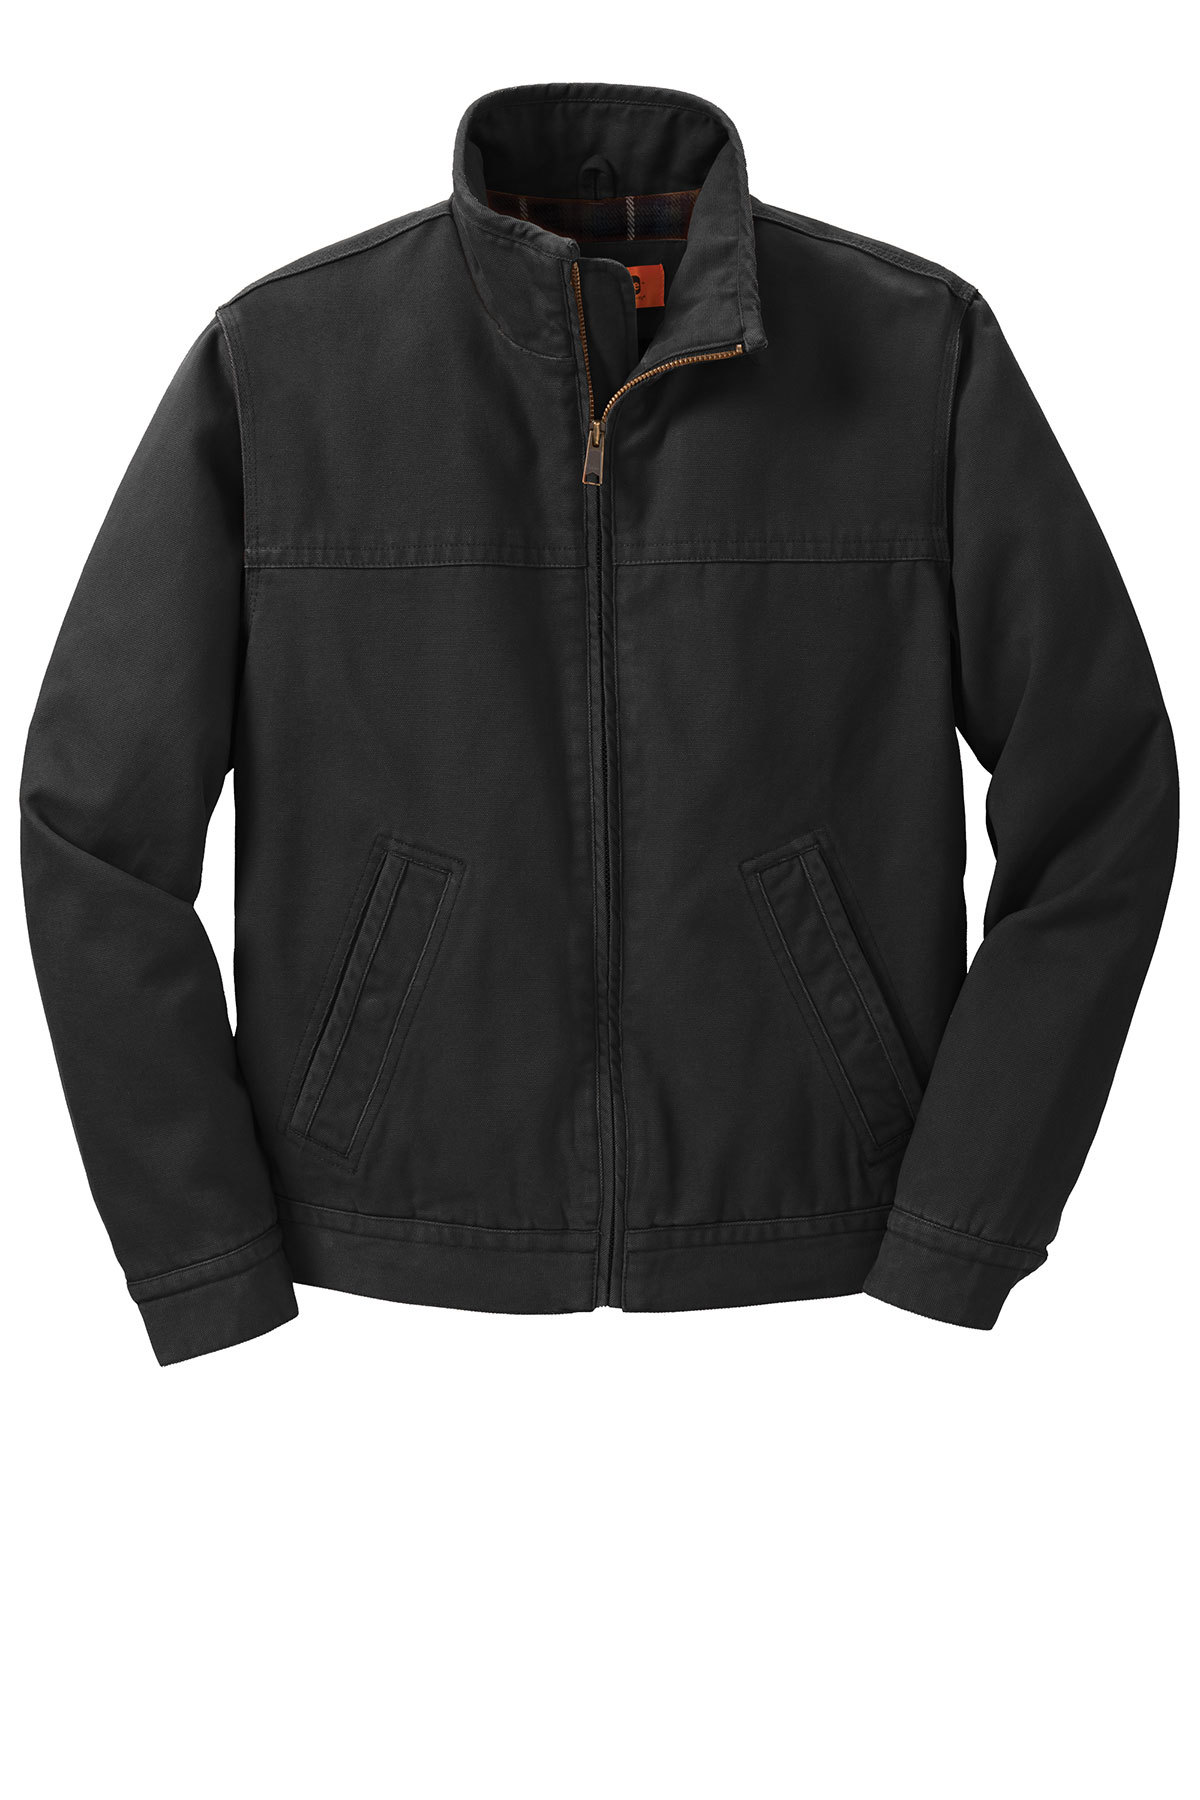 Washed Duck Cloth Flannel-lined Work Jacket | Rocky Mountain Embroidery ...